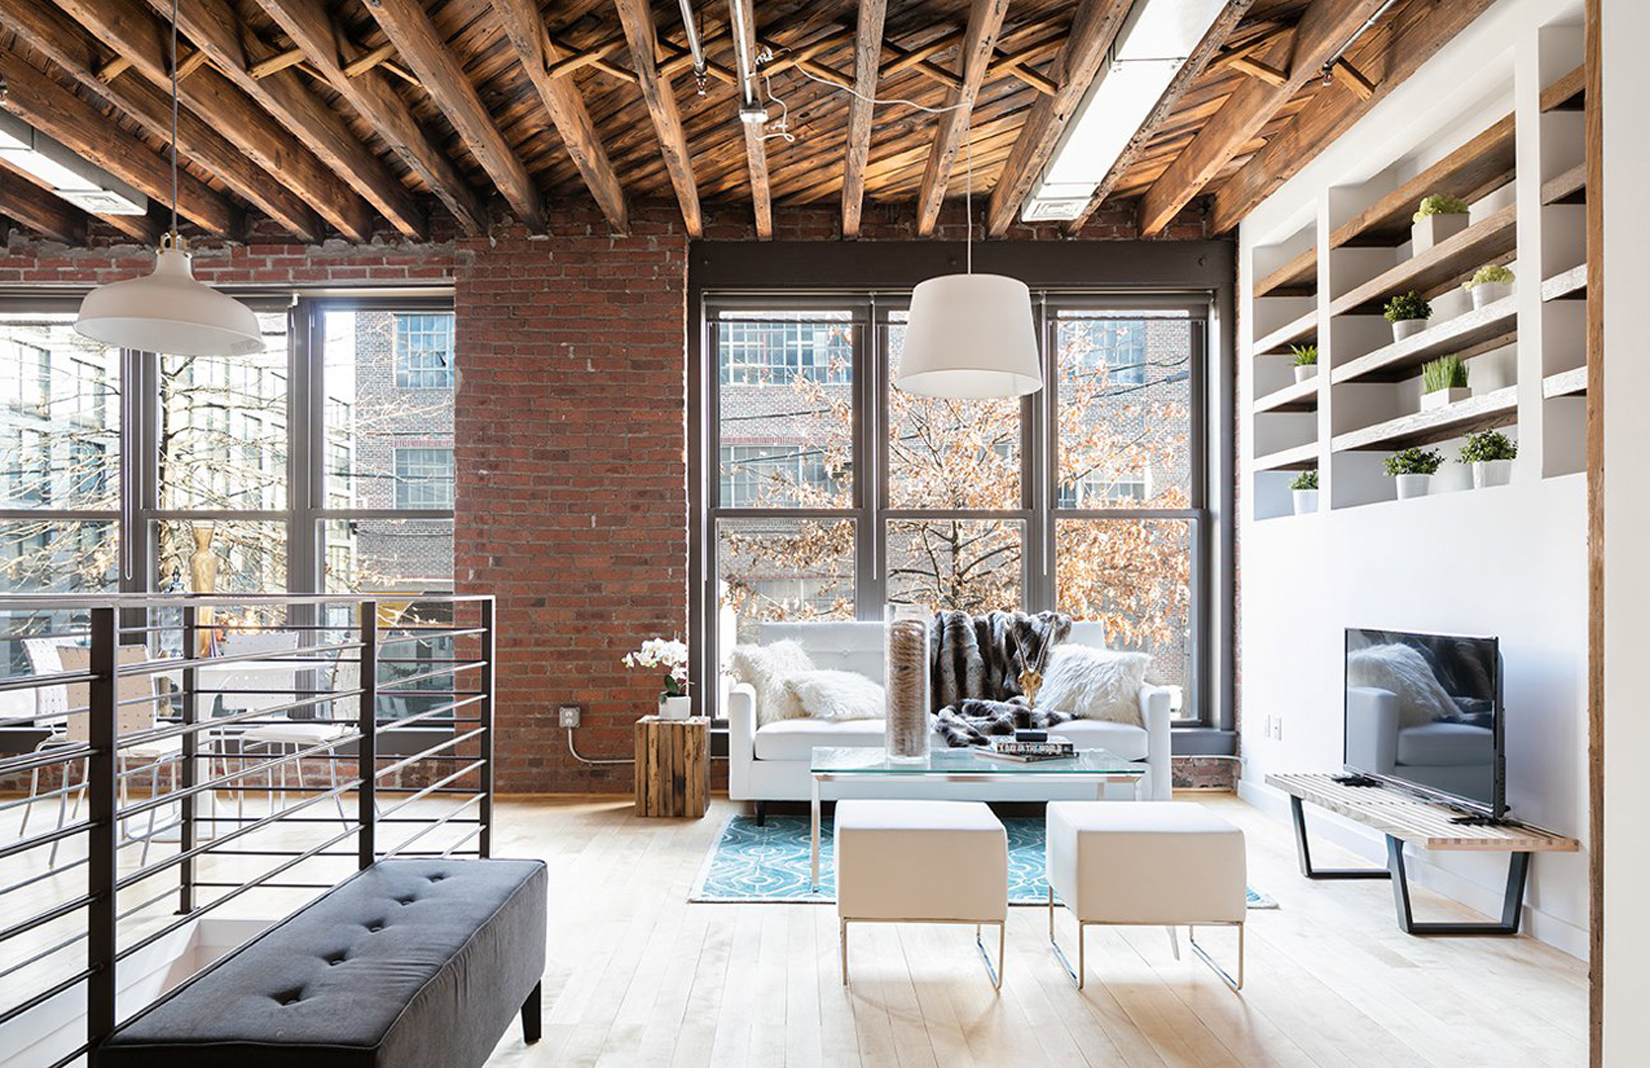 Property Of The Week A New York Loft With A Sweet History The Spaces